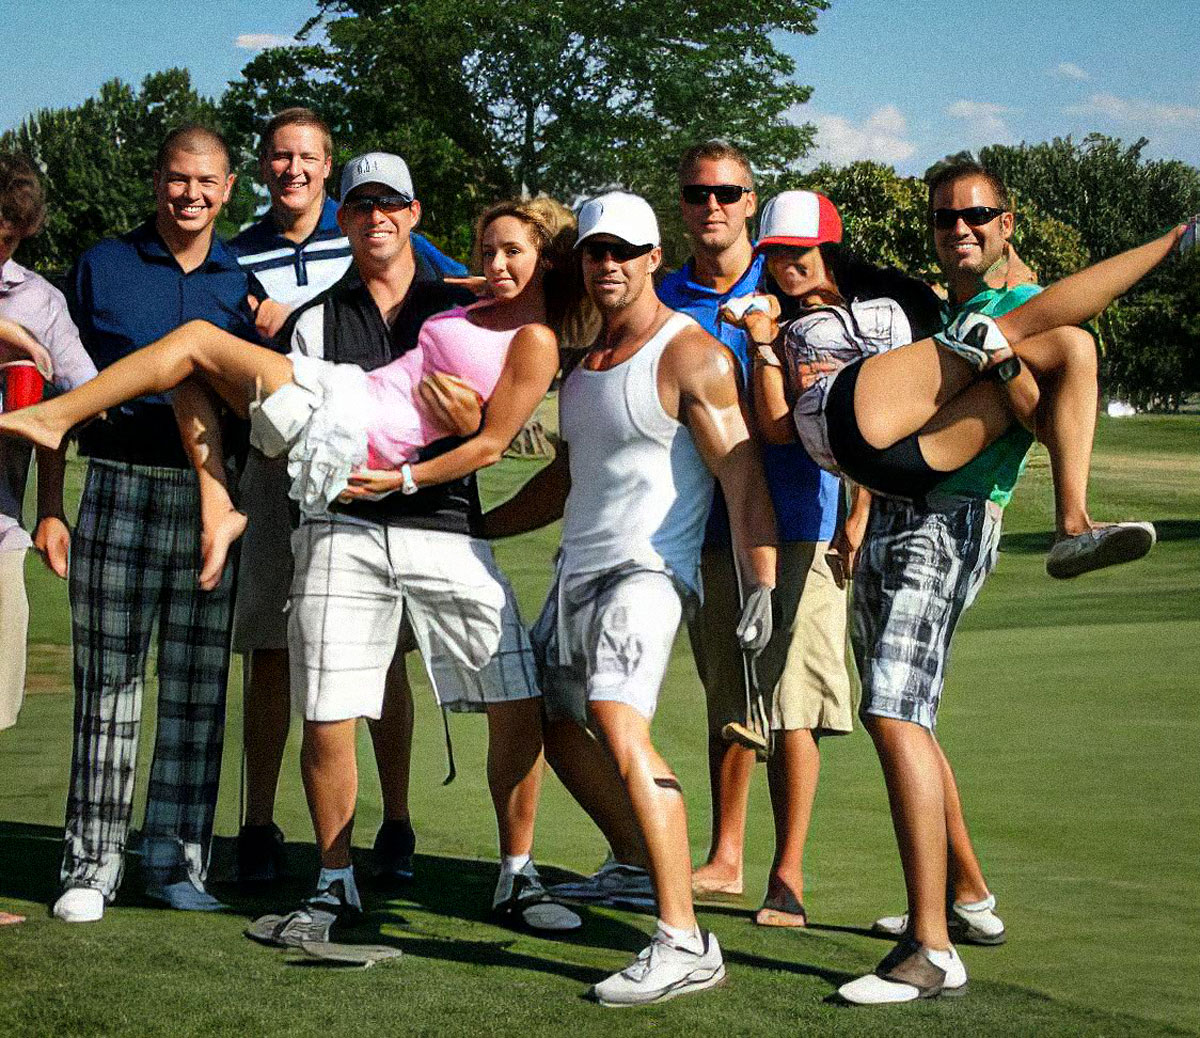 Bachelor Party Guests In Denver On The Golf Course With A Few Denver Strippers By Bare Assets Bachelor Party Planning